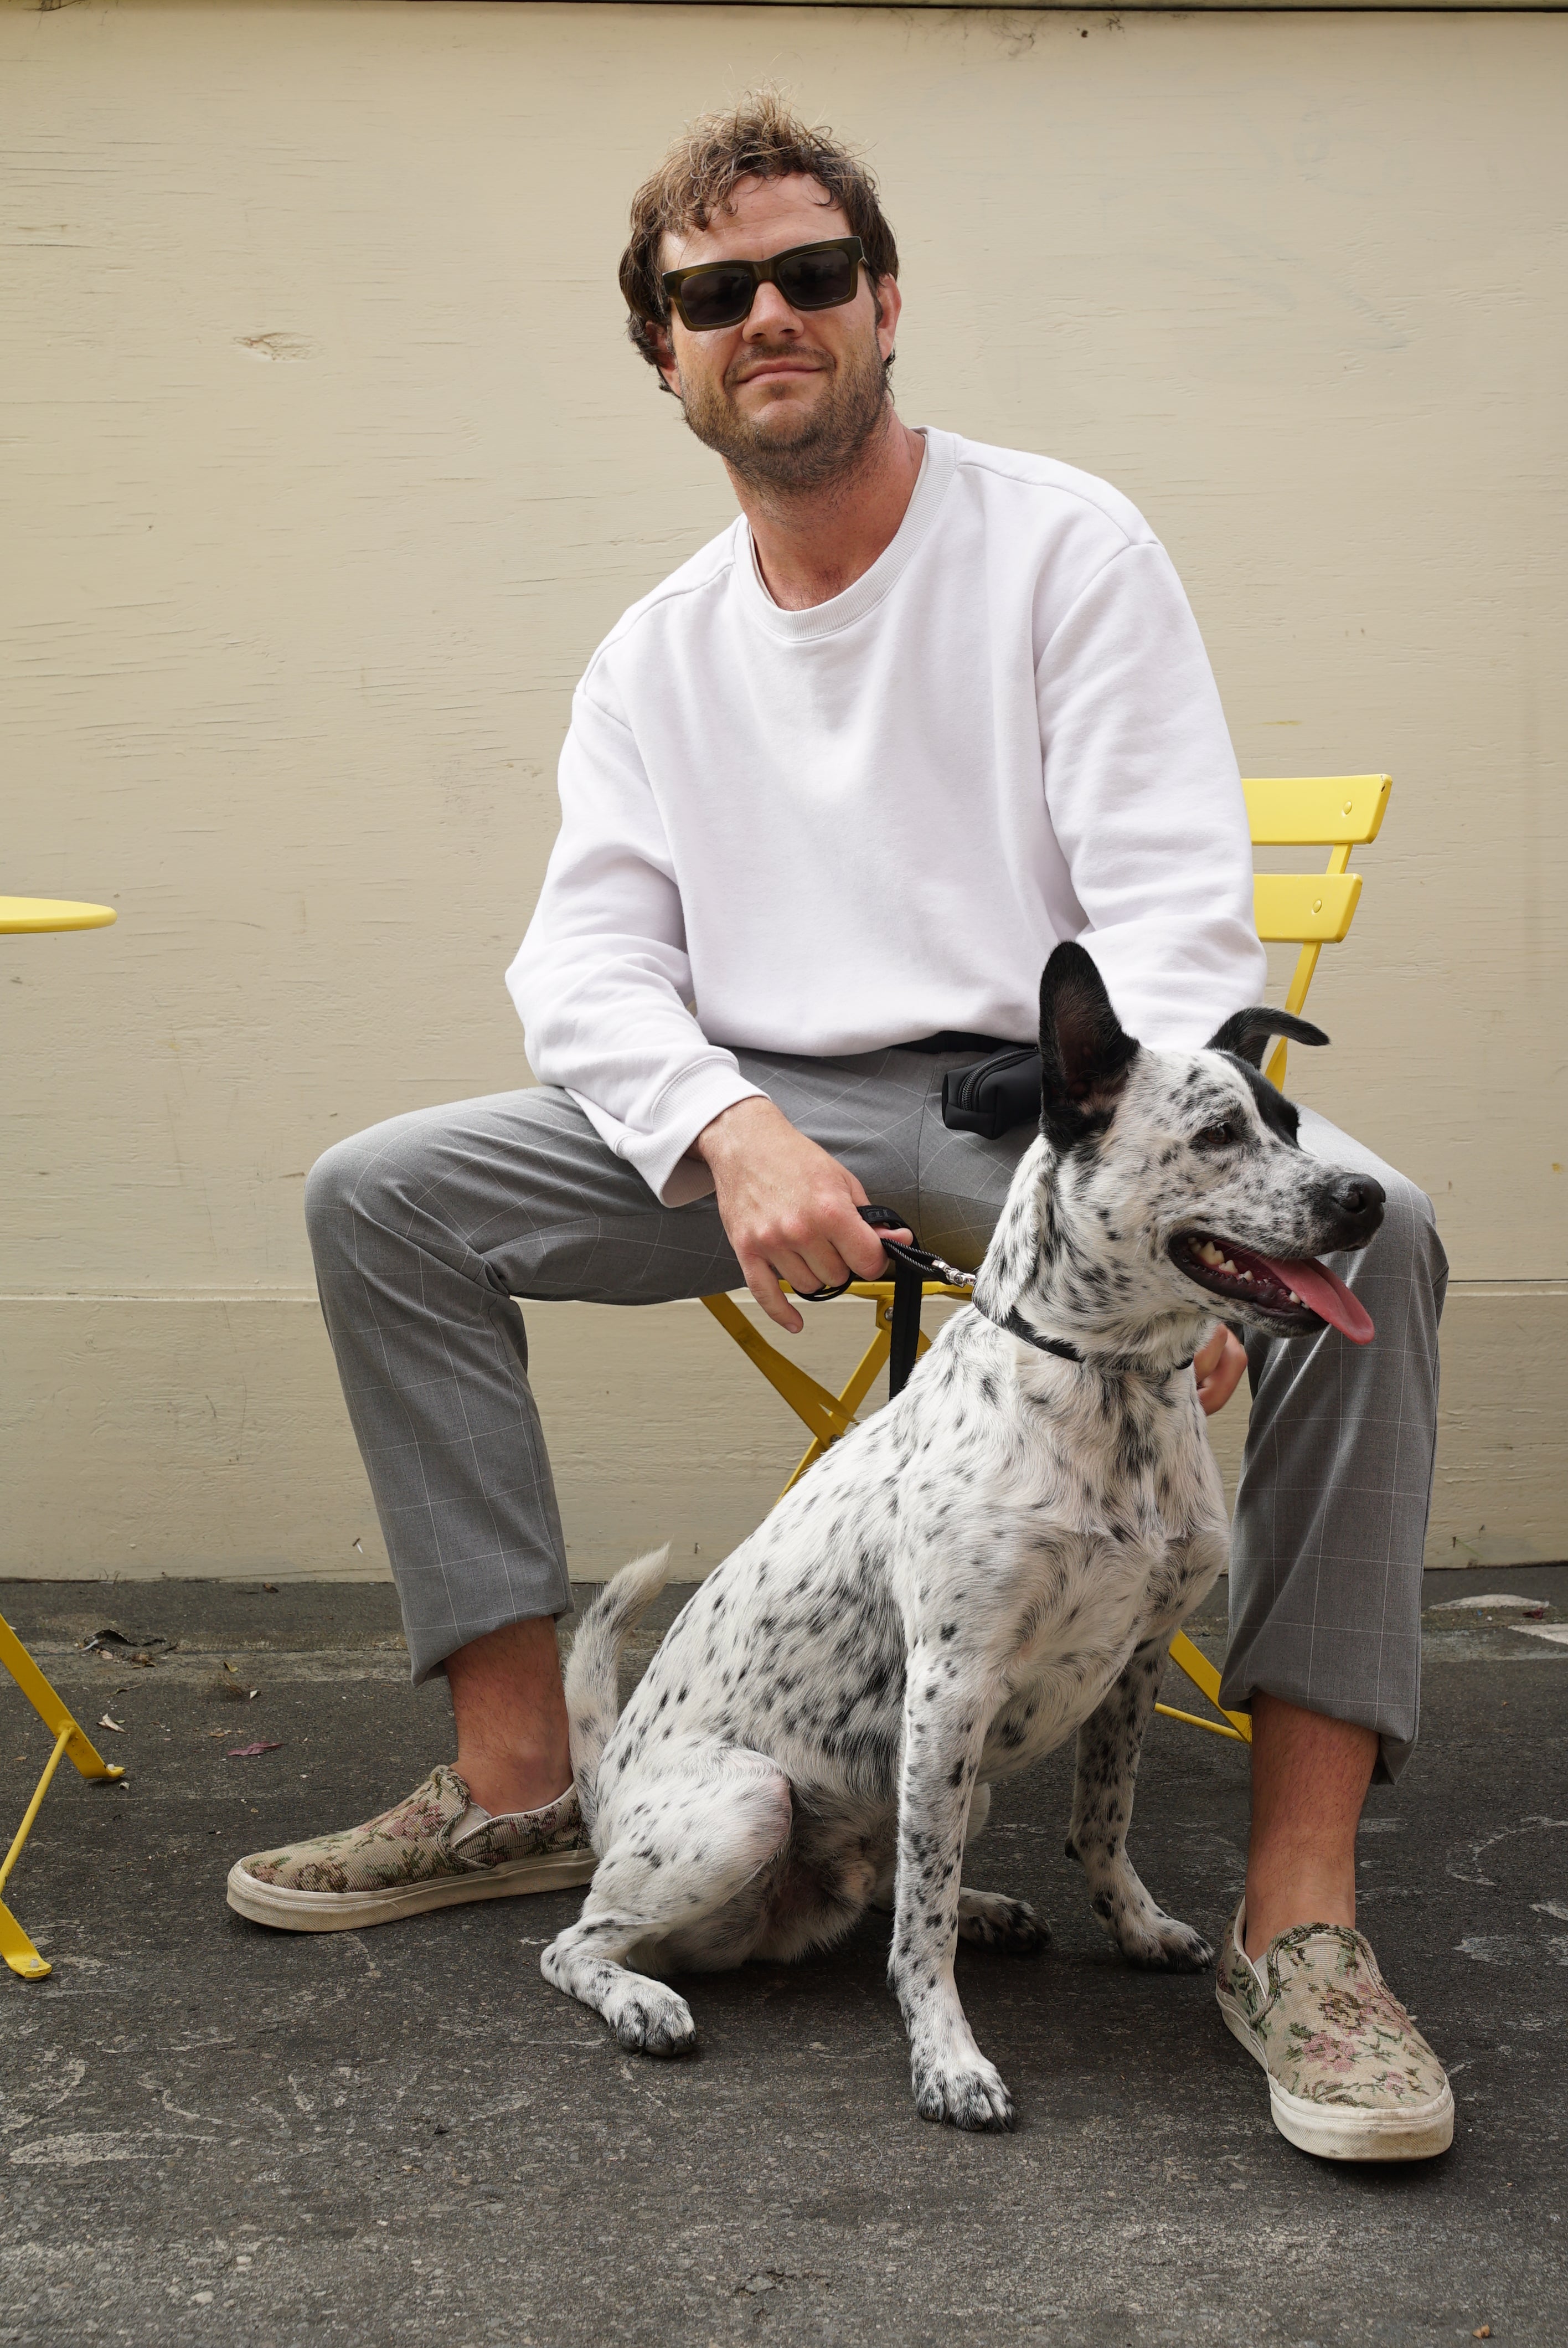 A man wearing sunglasses and a white sweatshirt sitting on a yellow chair with a black and white dog sitting next to him. The man is holding the dog's leash, which is a product from Lulu's from Cali, and both are looking off to the side.